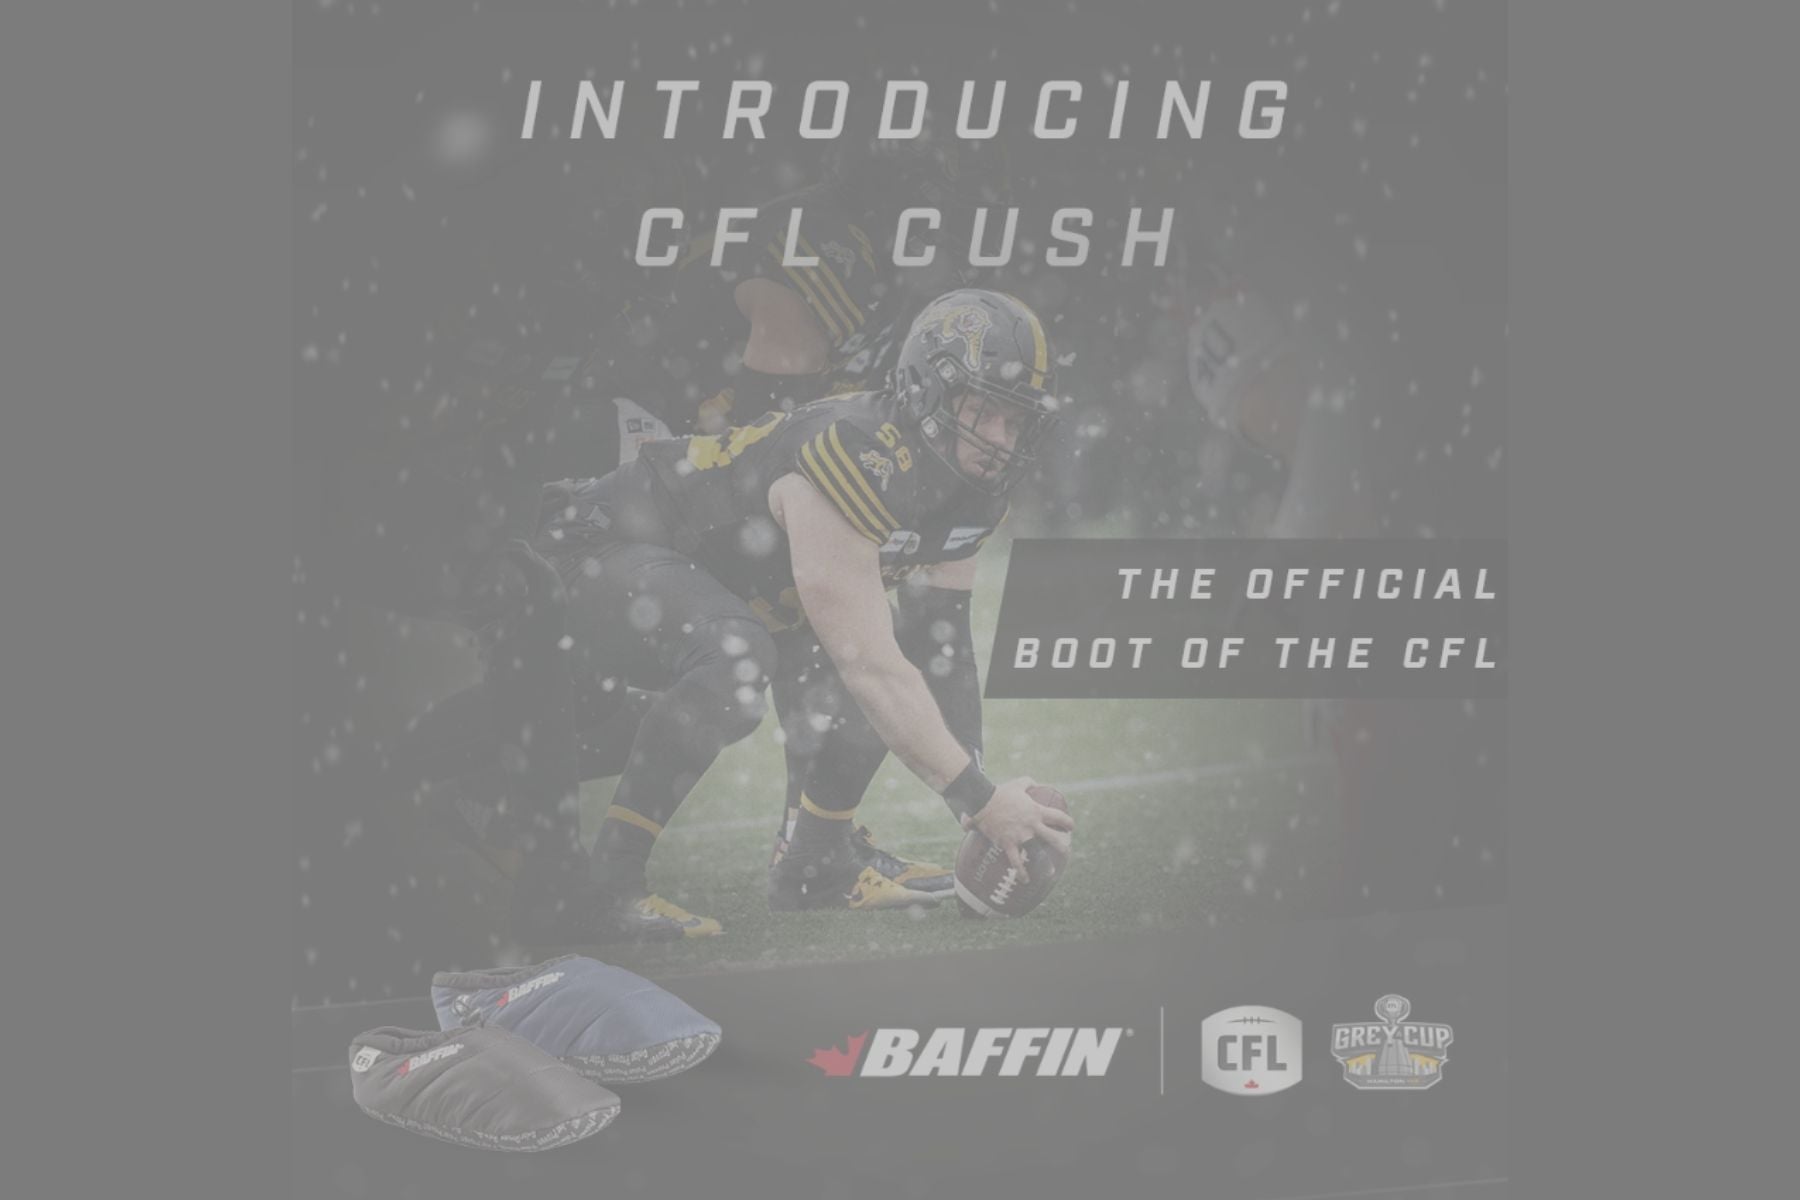 BAFFIN INTRODUCES THE ULTIMATE TAILGATE FOOTWEAR, CUSH (CFL)